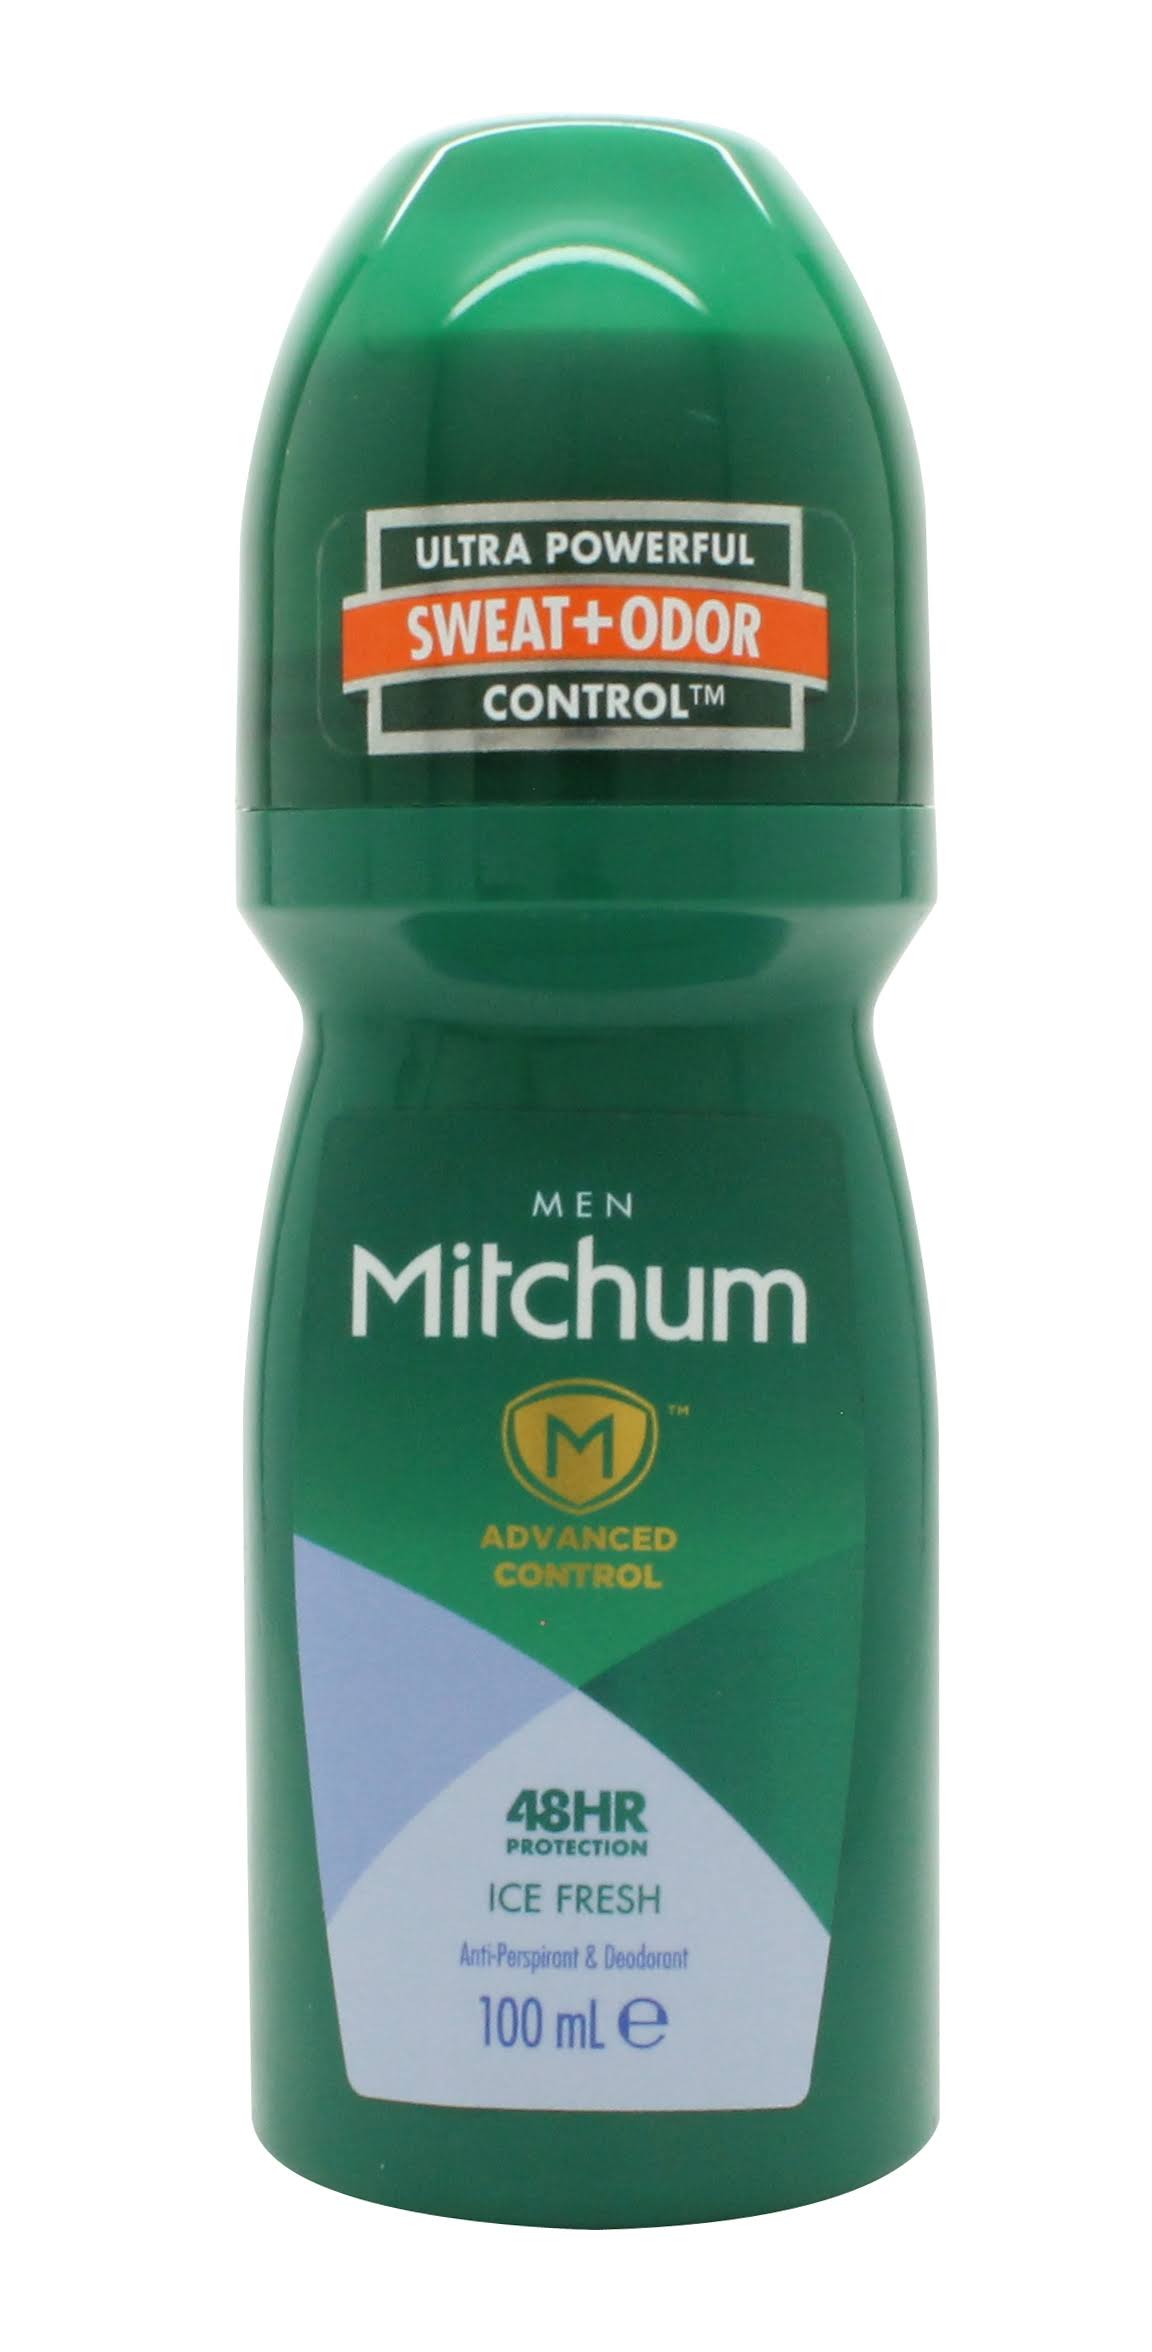 Mitchum Men 48H Protection Anti Perspirant and Deodorant Roll On - Ice Fresh, 100ml